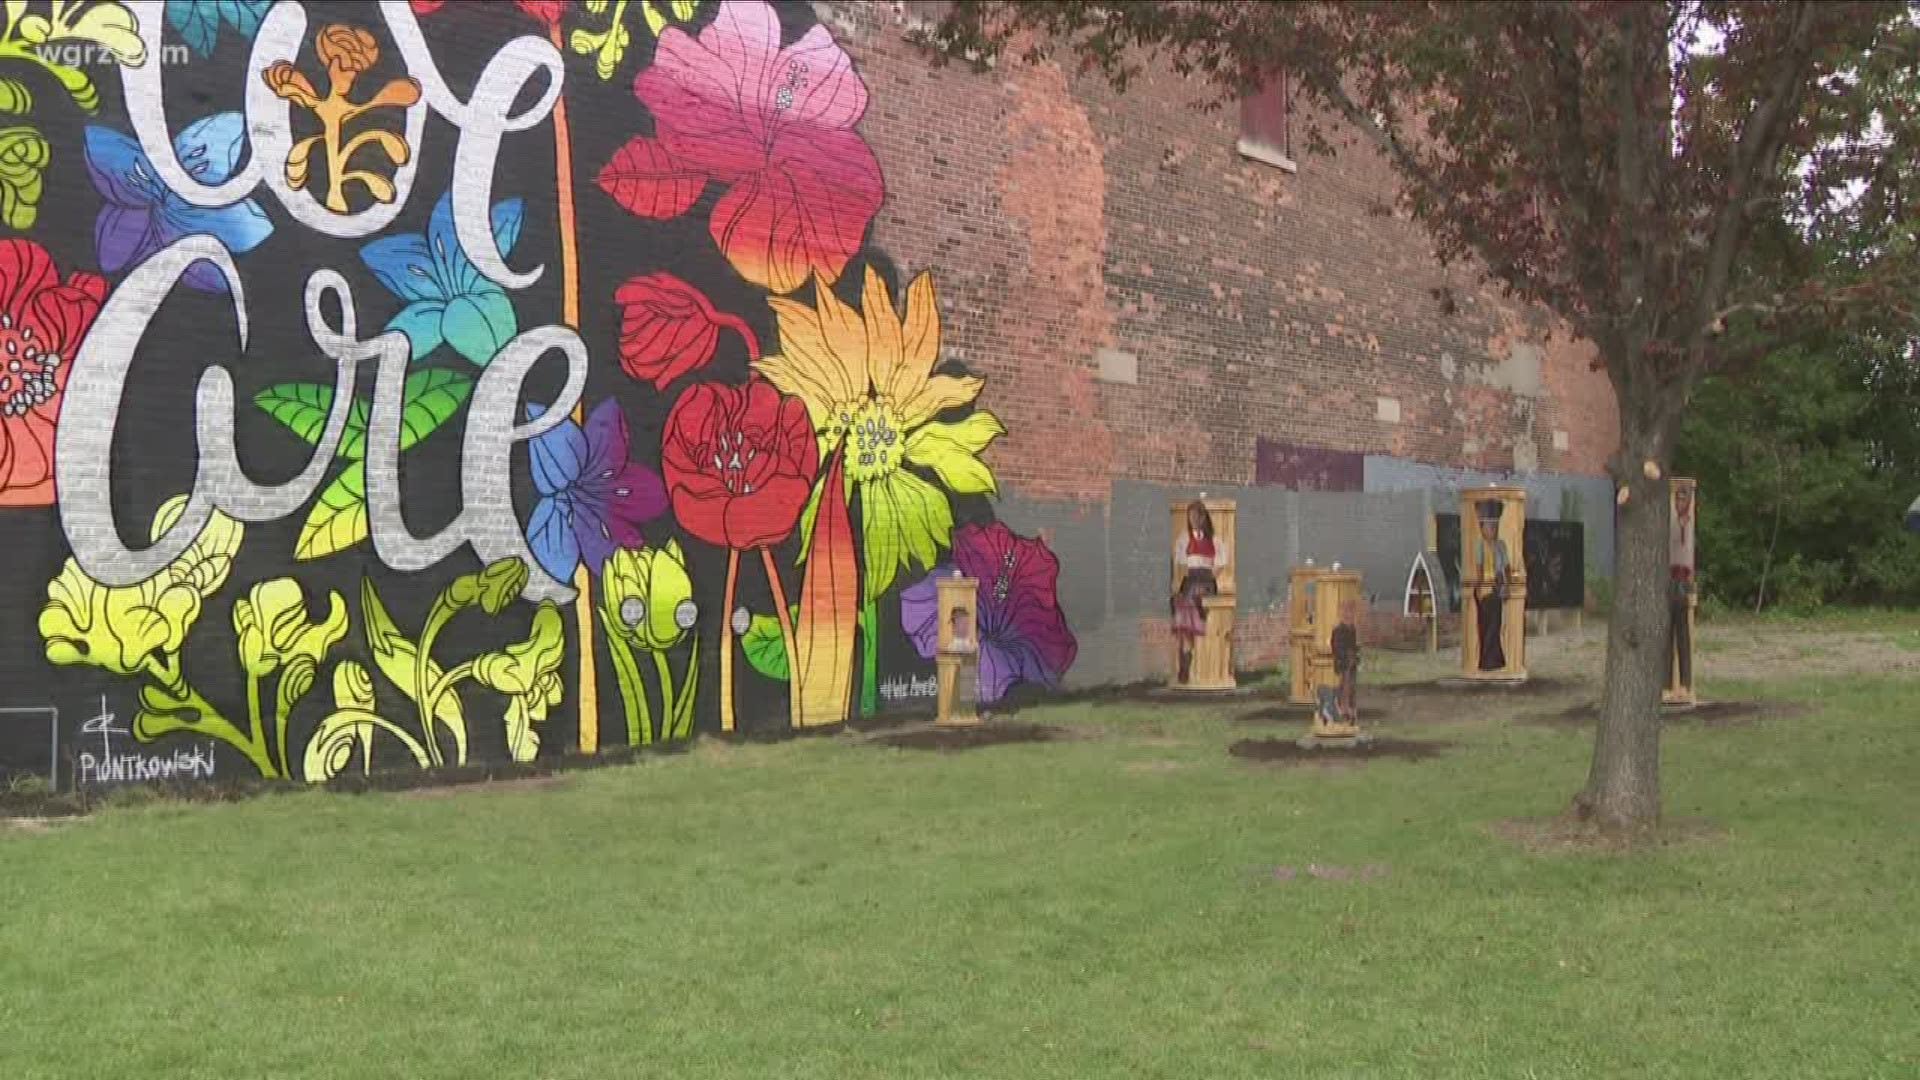 This colorful mural called "We Are" just went up along Niagara Street in Black Rock